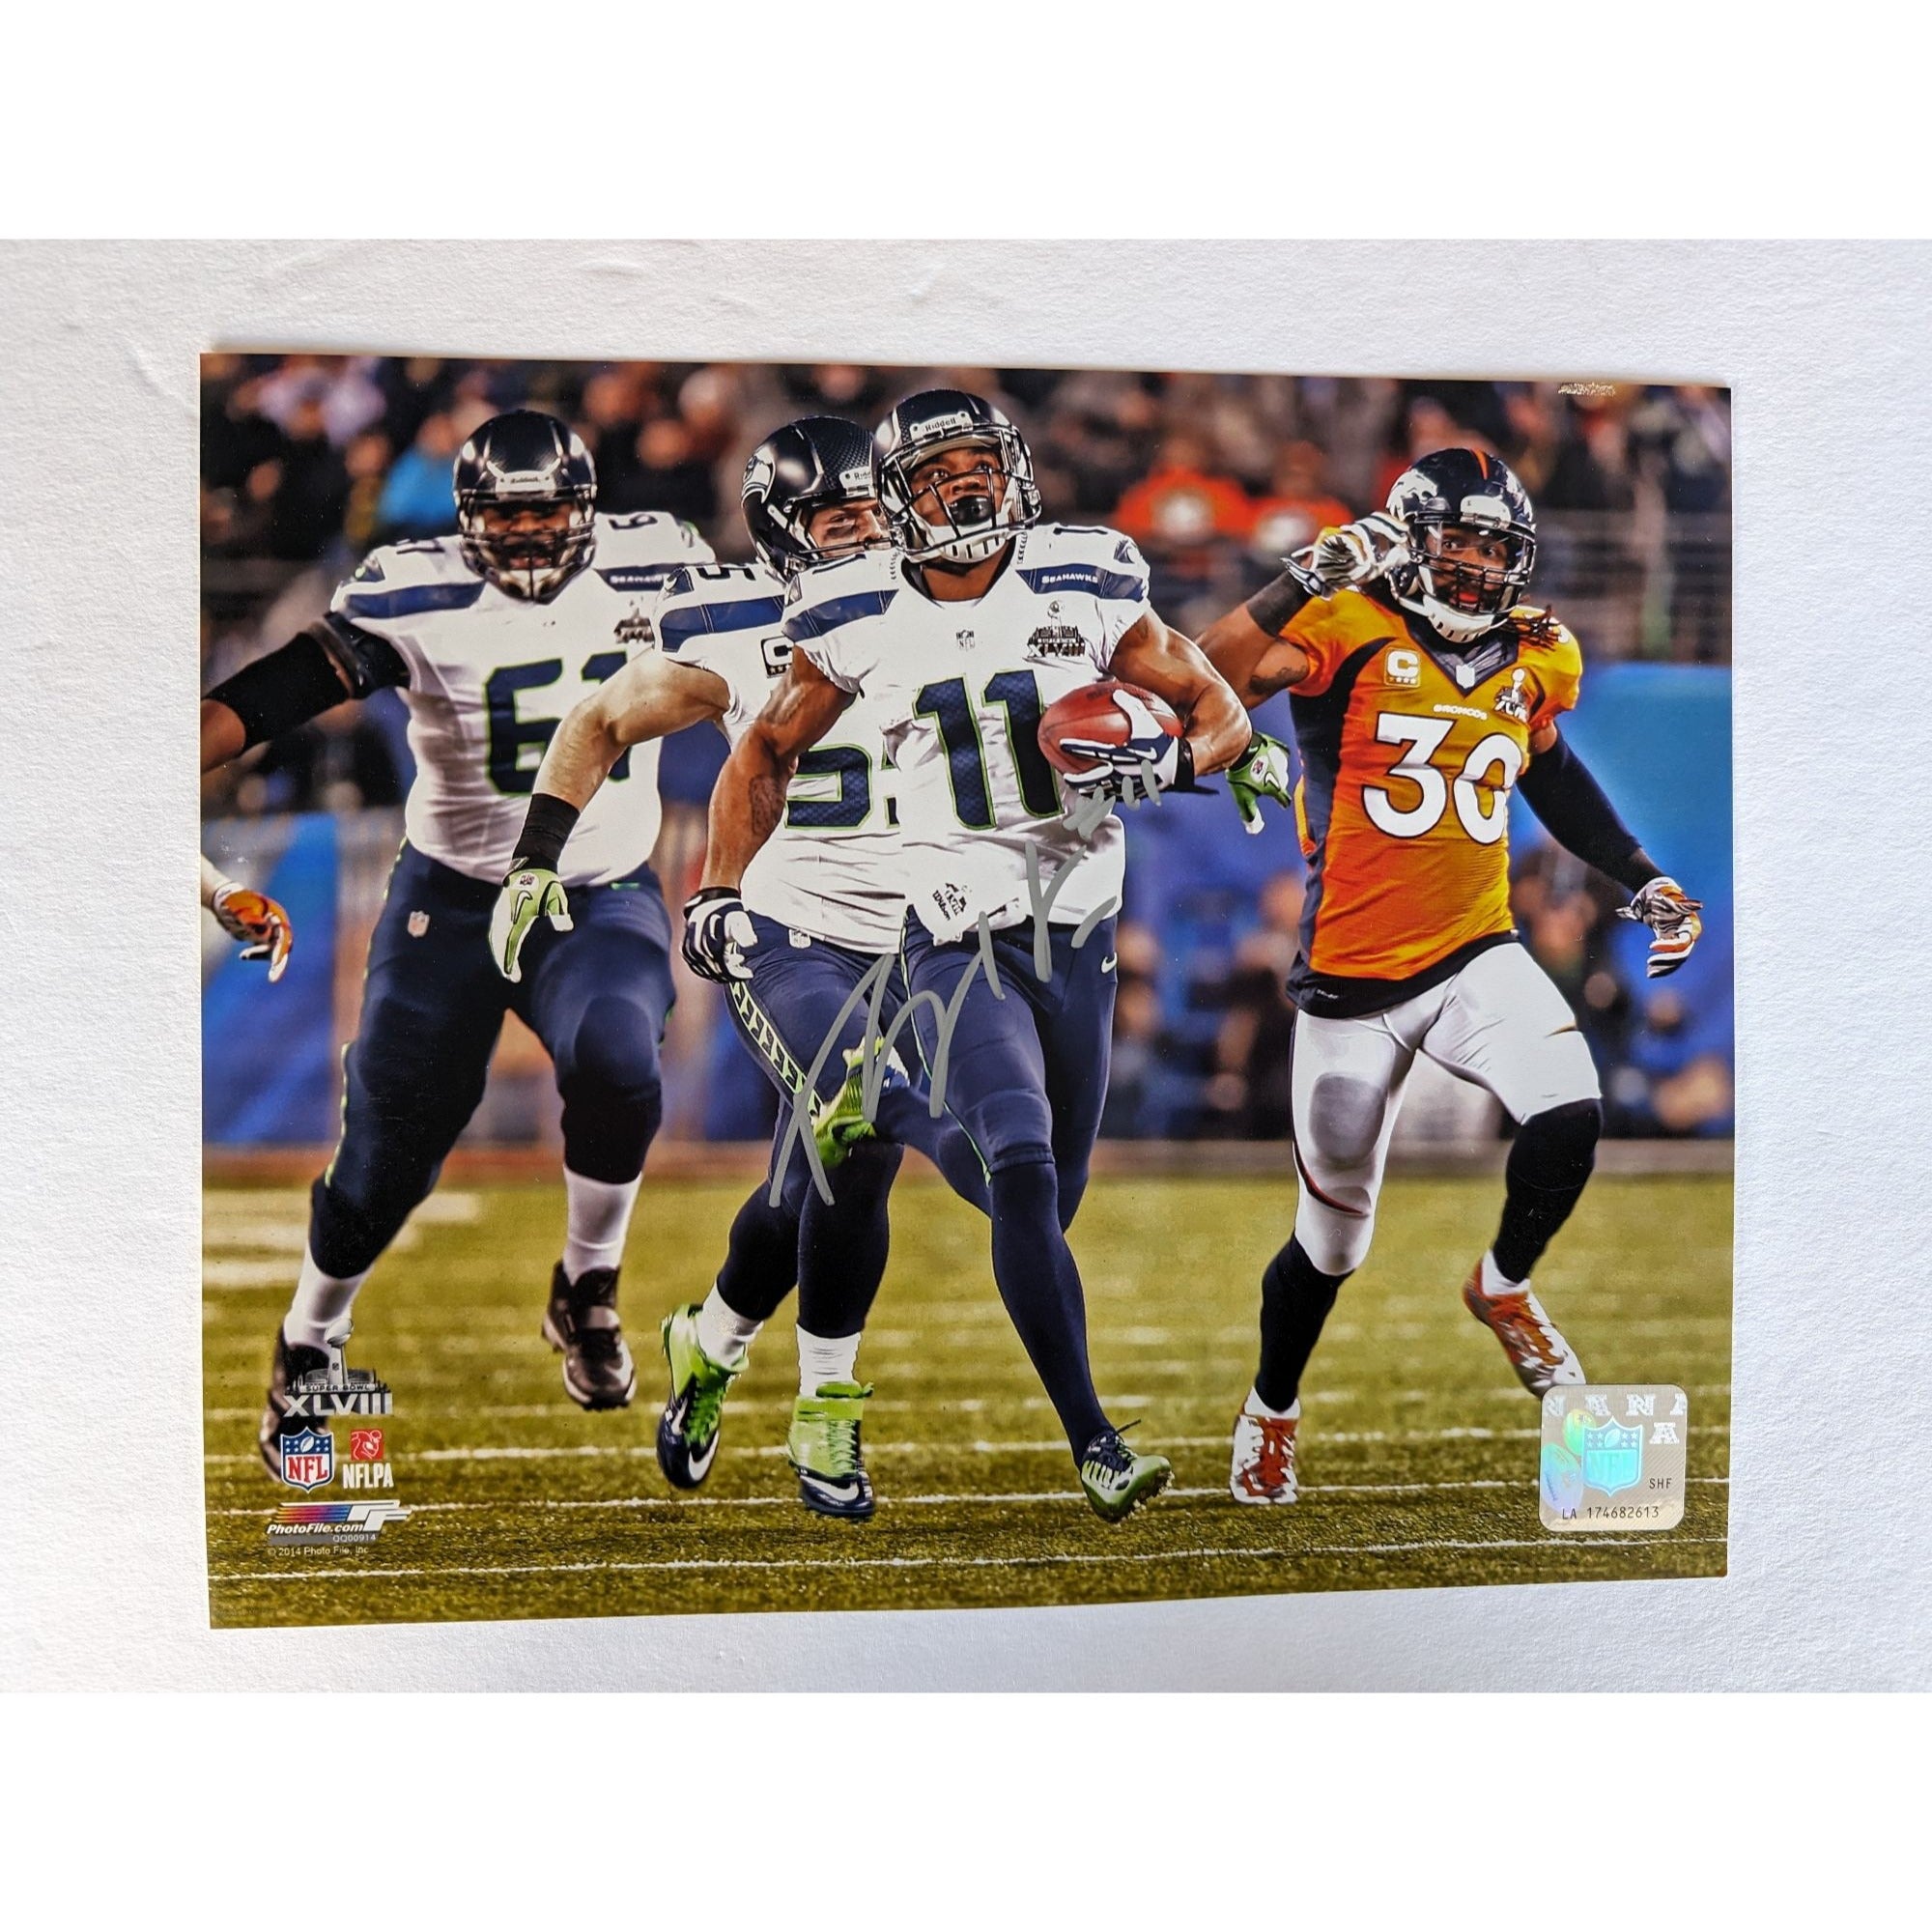 Percy Harvin Seattle Seahawks Super Bowl champion 8x10 photo signed